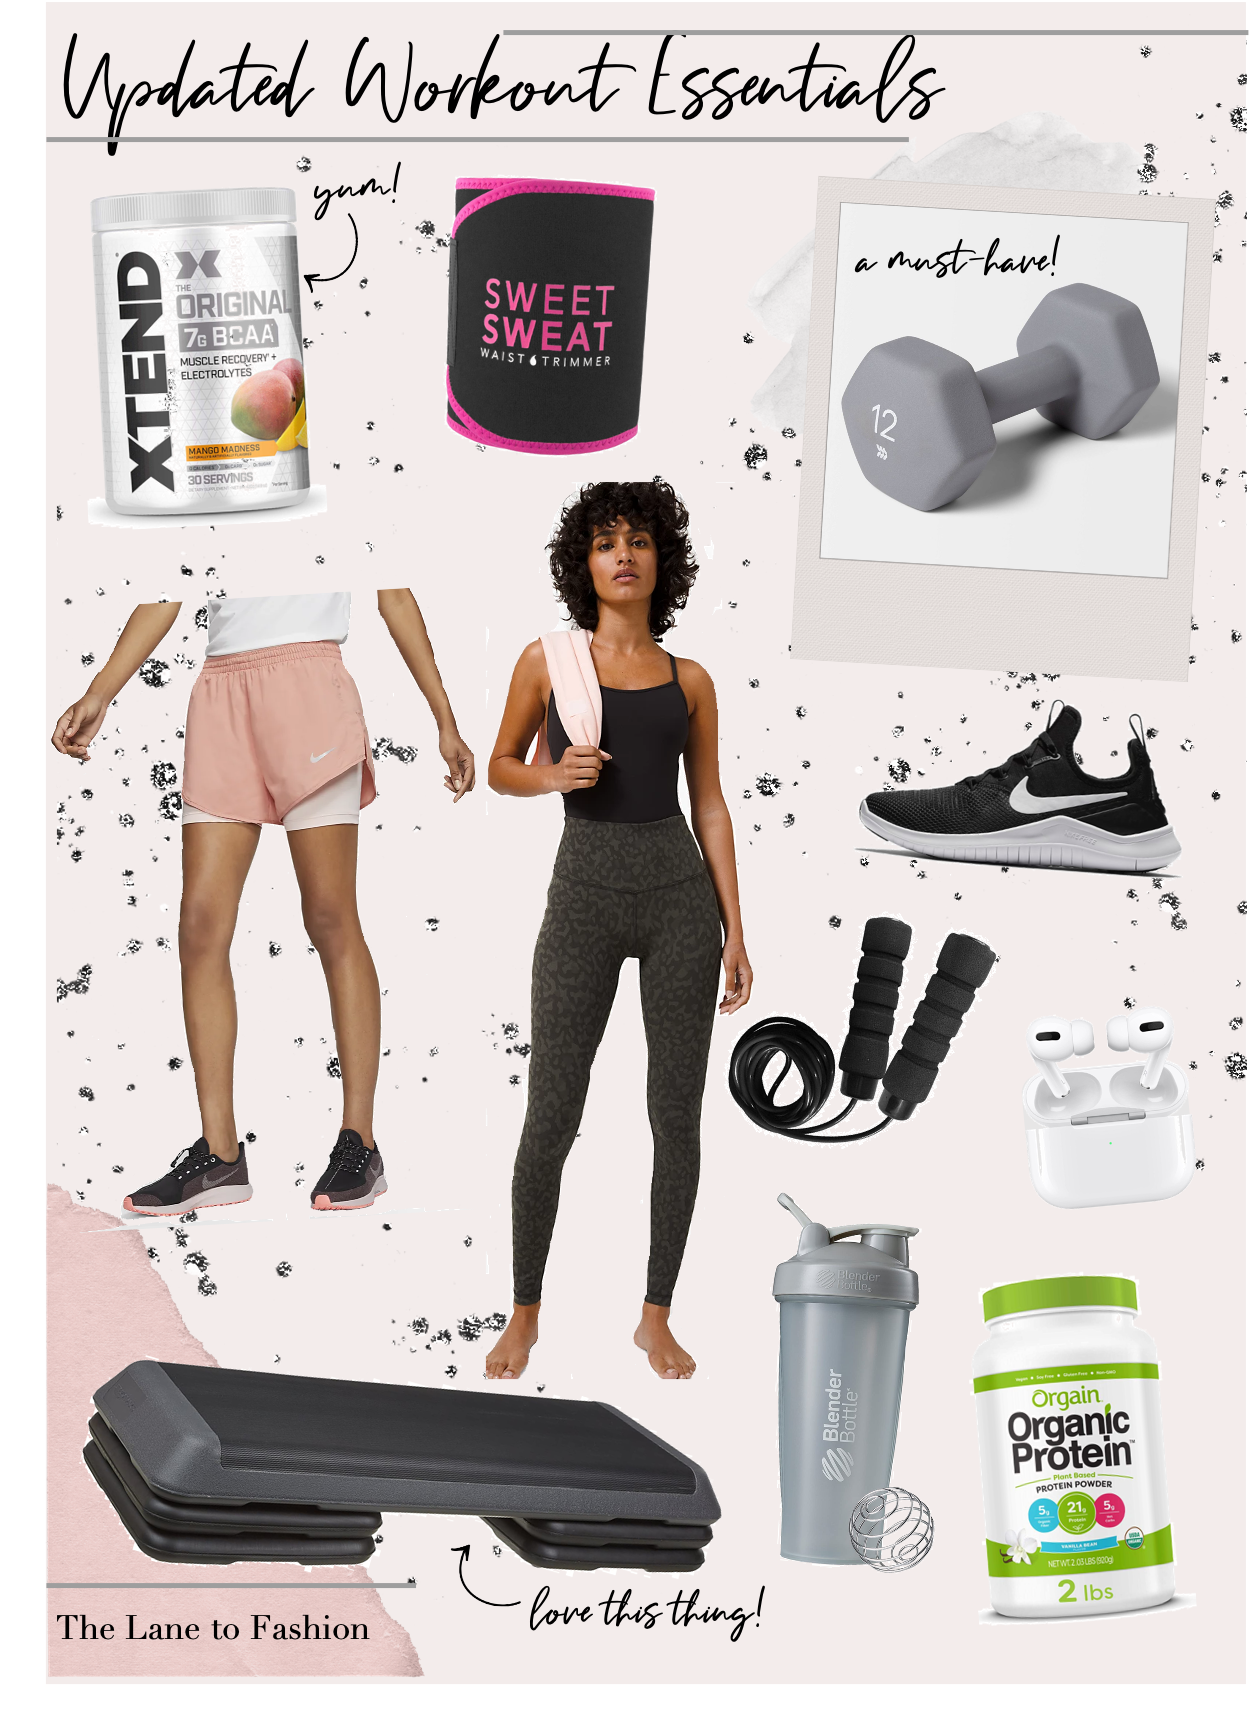 Updated Workout Essentials and Schedule - The Lane to Fashion